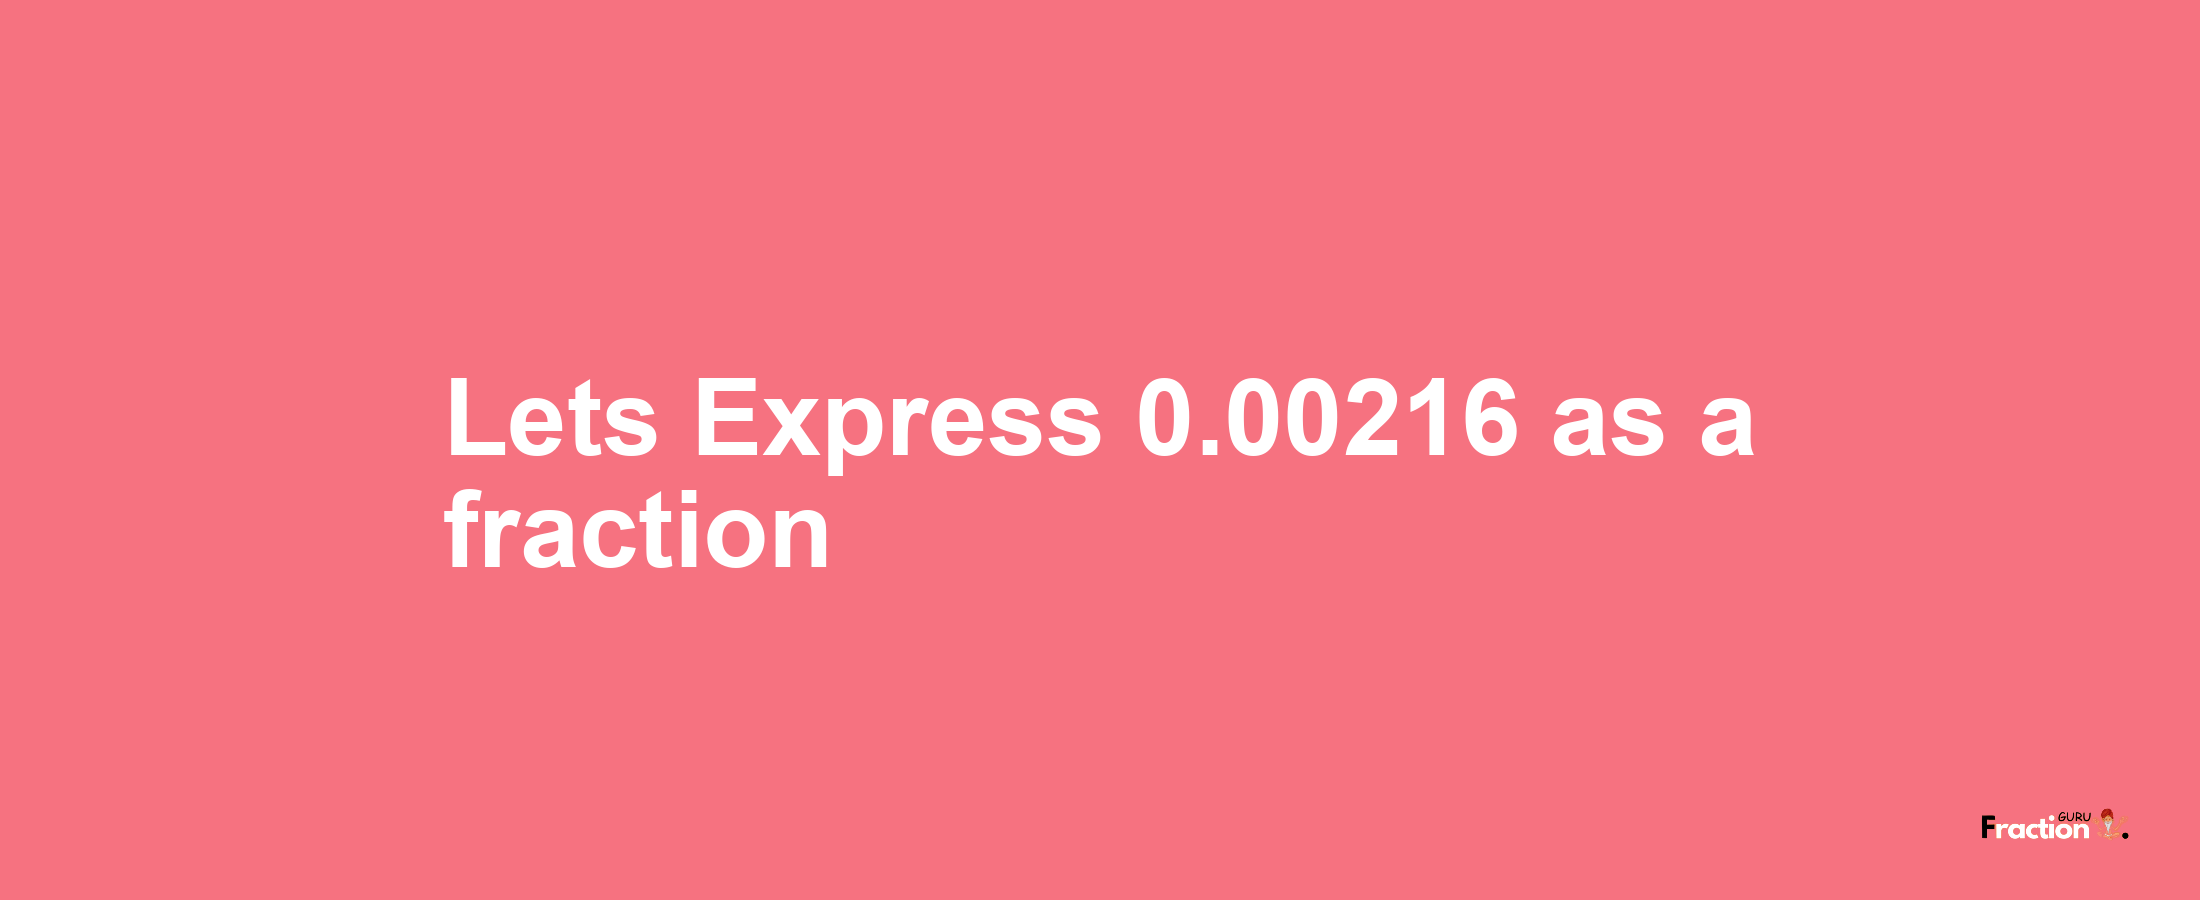 Lets Express 0.00216 as afraction